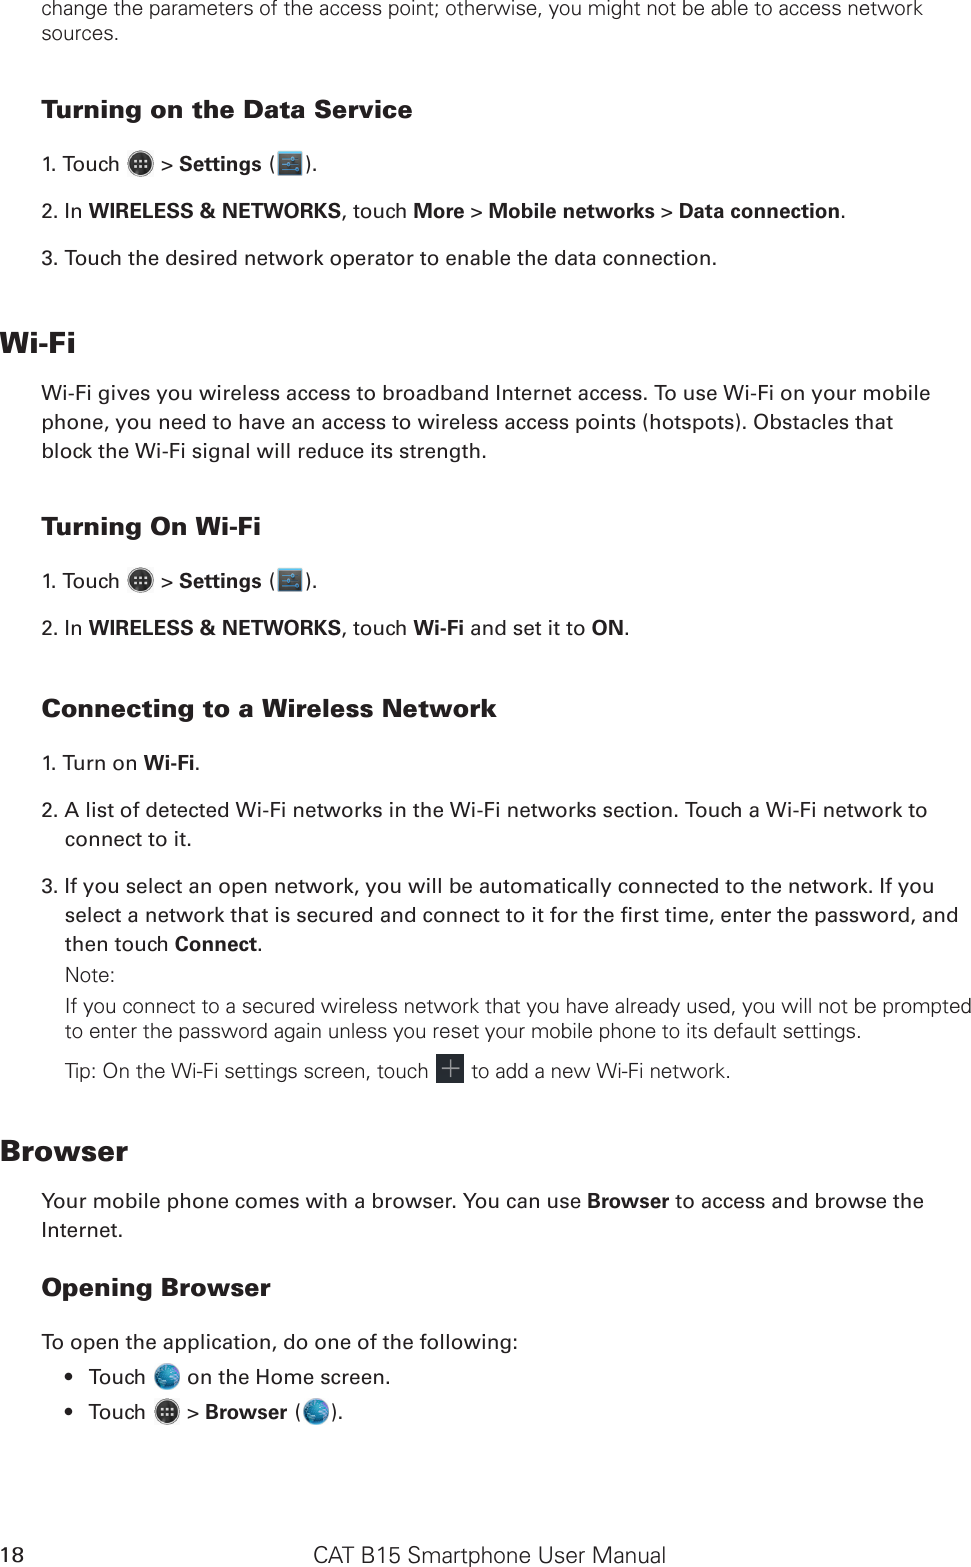 CAT B15 Smartphone User Manual18change the parameters of the access point; otherwise, you might not be able to access network sources.Turning on the Data Service1. Touch   &gt; Settings ( ).2. In WIRELESS &amp; NETWORKS, touch More &gt; Mobile networks &gt; Data connection.3. Touch the desired network operator to enable the data connection.Wi-FiWi-Fi gives you wireless access to broadband Internet access. To use Wi-Fi on your mobilephone, you need to have an access to wireless access points (hotspots). Obstacles thatblock the Wi-Fi signal will reduce its strength.Turning On Wi-Fi1. Touch   &gt; Settings ( ).2. In WIRELESS &amp; NETWORKS, touch Wi-Fi and set it to ON.Connecting to a Wireless Network1. Turn on Wi-Fi.2. A list of detected Wi-Fi networks in the Wi-Fi networks section. Touch a Wi-Fi network to connect to it.3. If you select an open network, you will be automatically connected to the network. If you then touch Connect. Note:If you connect to a secured wireless network that you have already used, you will not be prompted to enter the password again unless you reset your mobile phone to its default settings.Tip: On the Wi-Fi settings screen, touch   to add a new Wi-Fi network.BrowserYour mobile phone comes with a browser. You can use Browser to access and browse theInternet.Opening BrowserTo open the application, do one of the following:Touch   on the Home screen. Touch   &gt; Browser ( ).